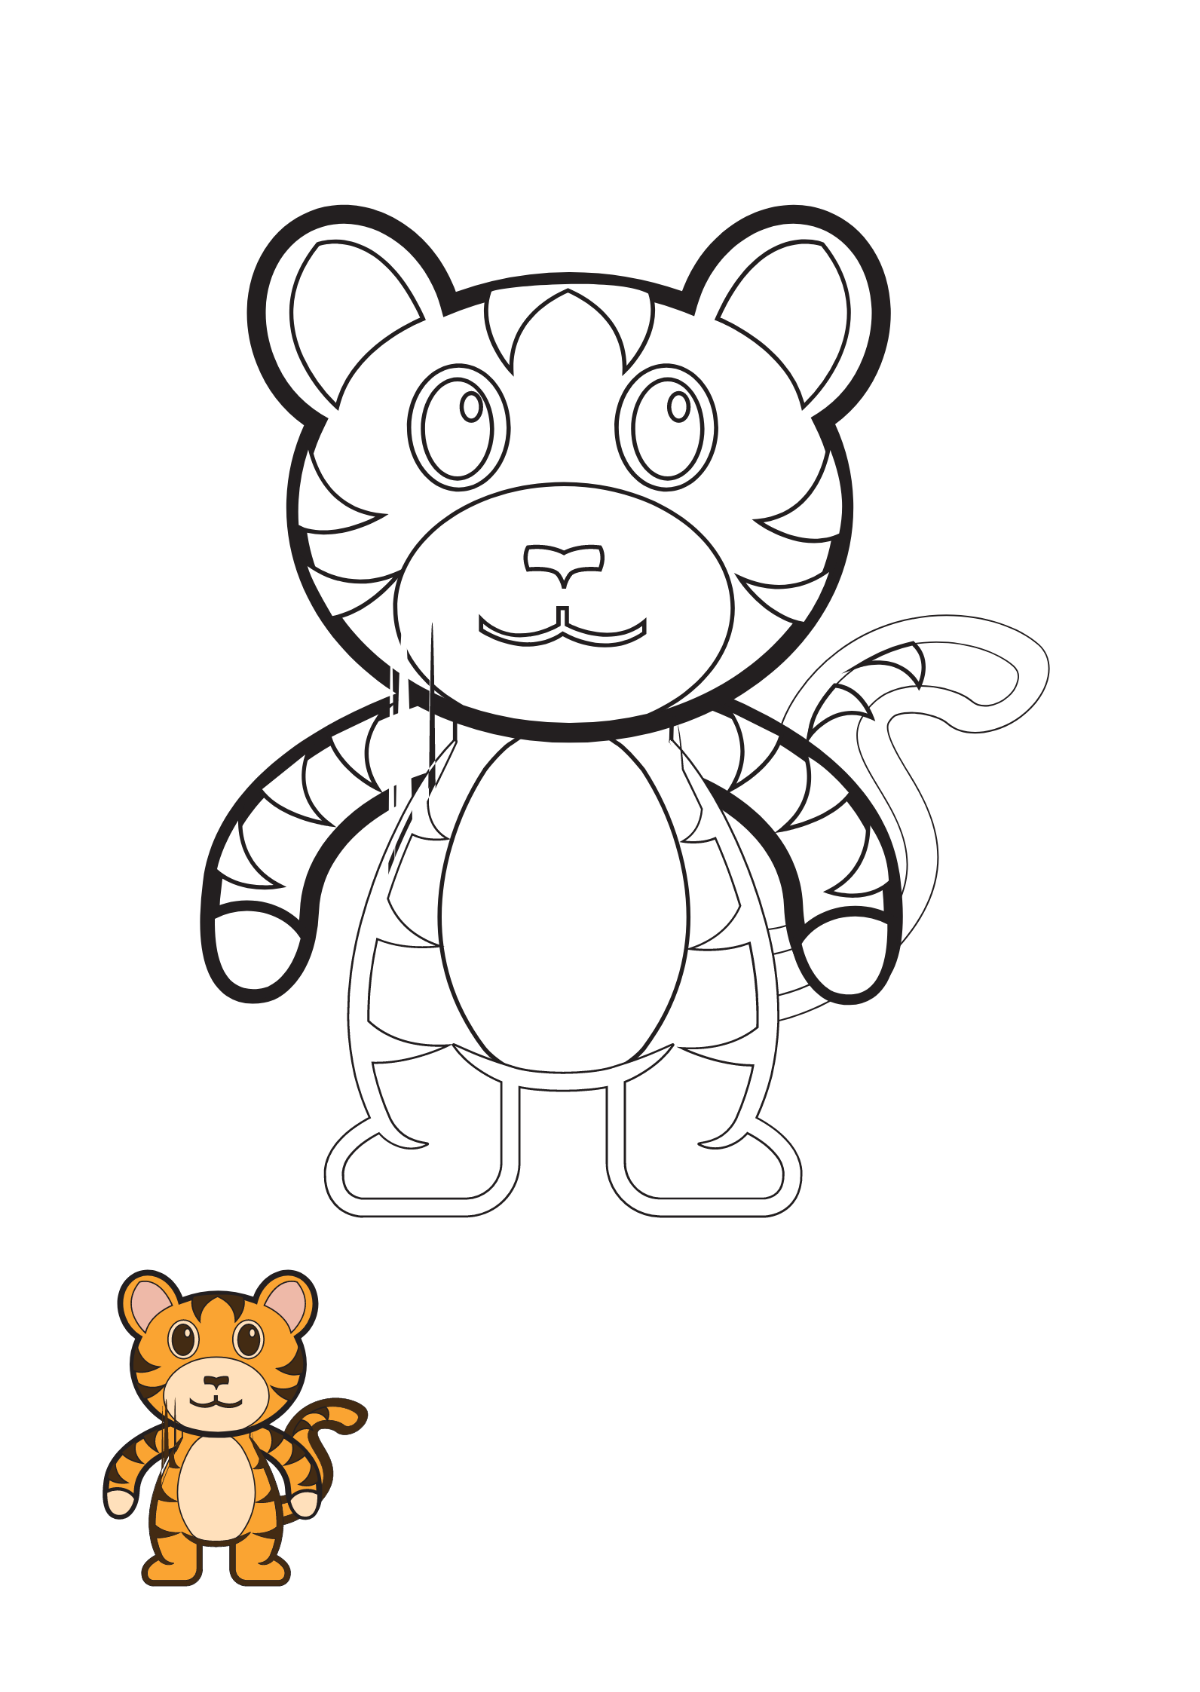 Tiger Mascot Coloring Page Template